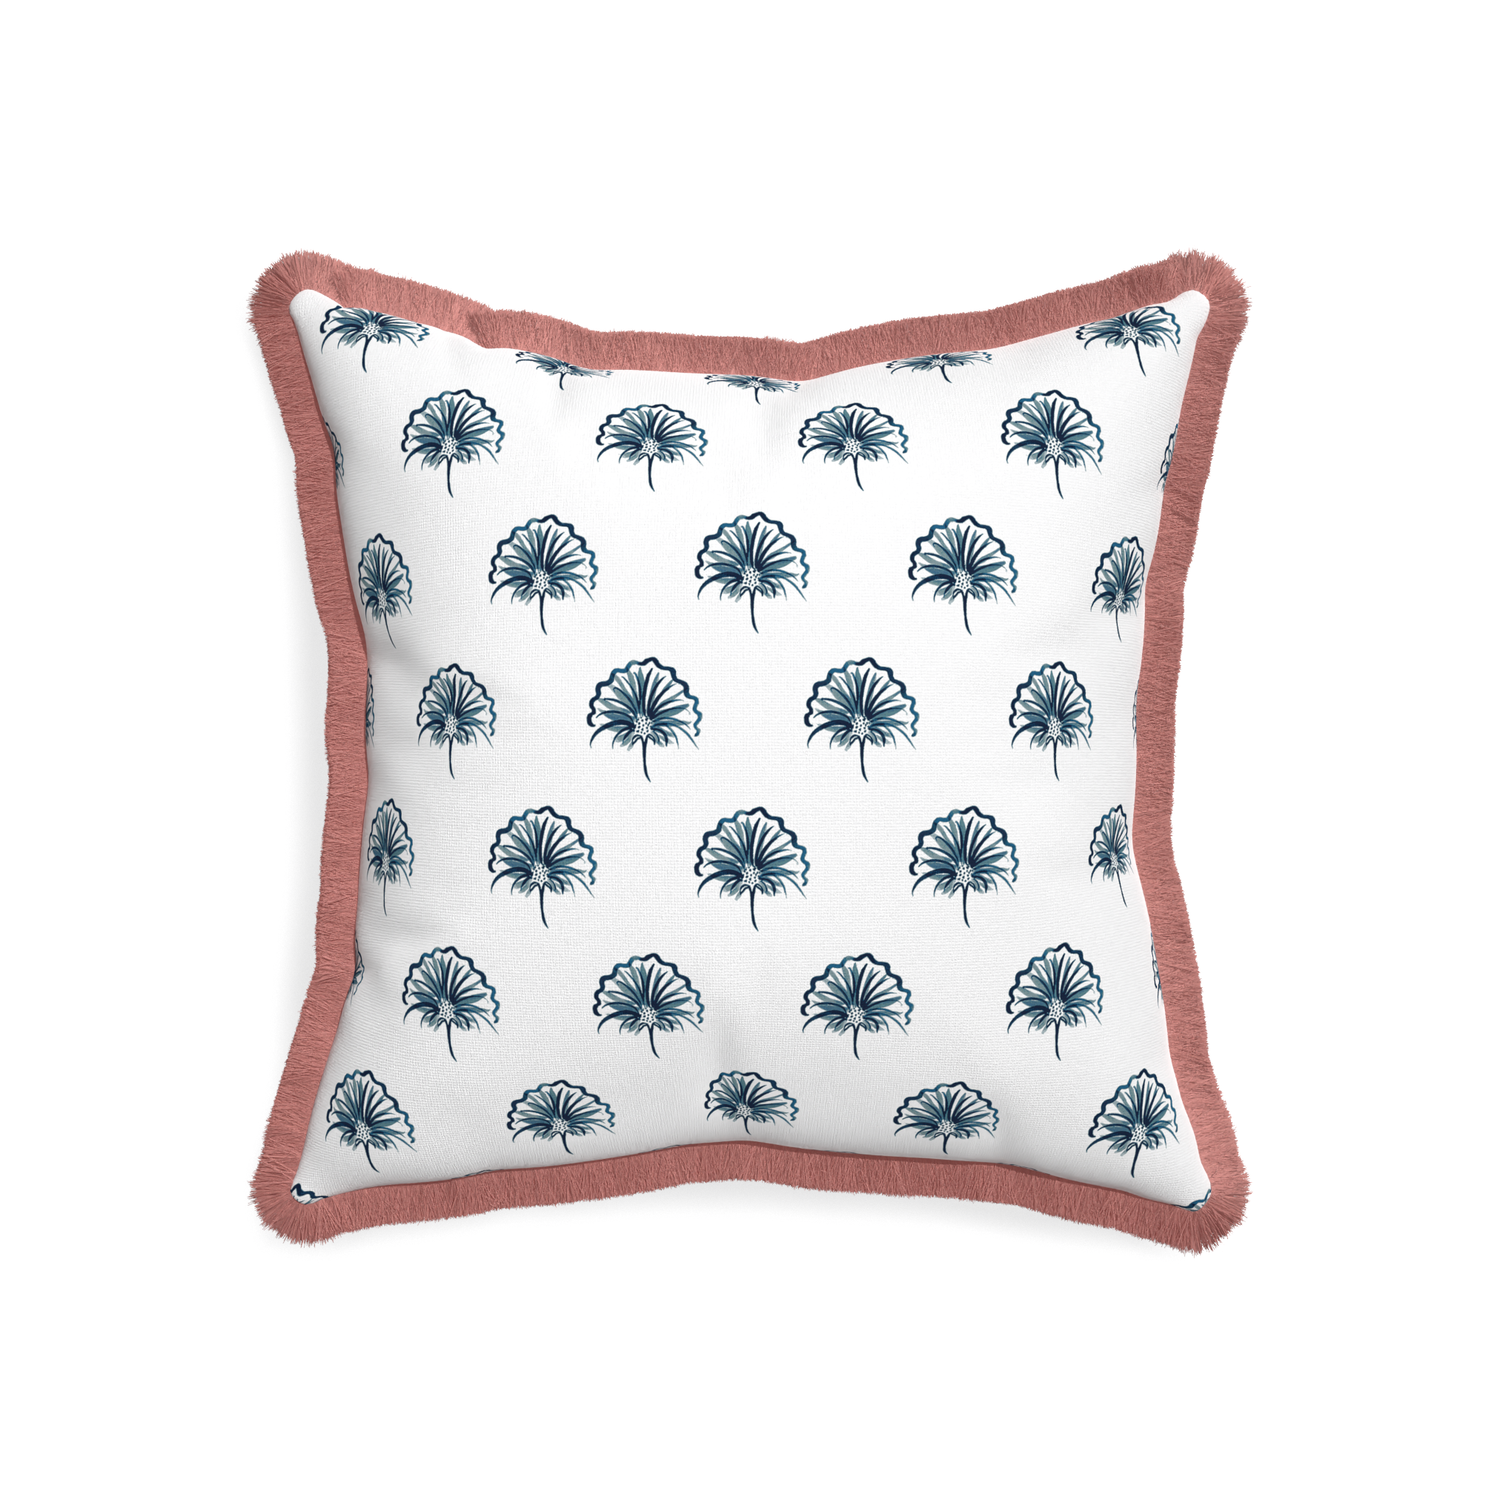 20-square penelope midnight custom floral navypillow with d fringe on white background